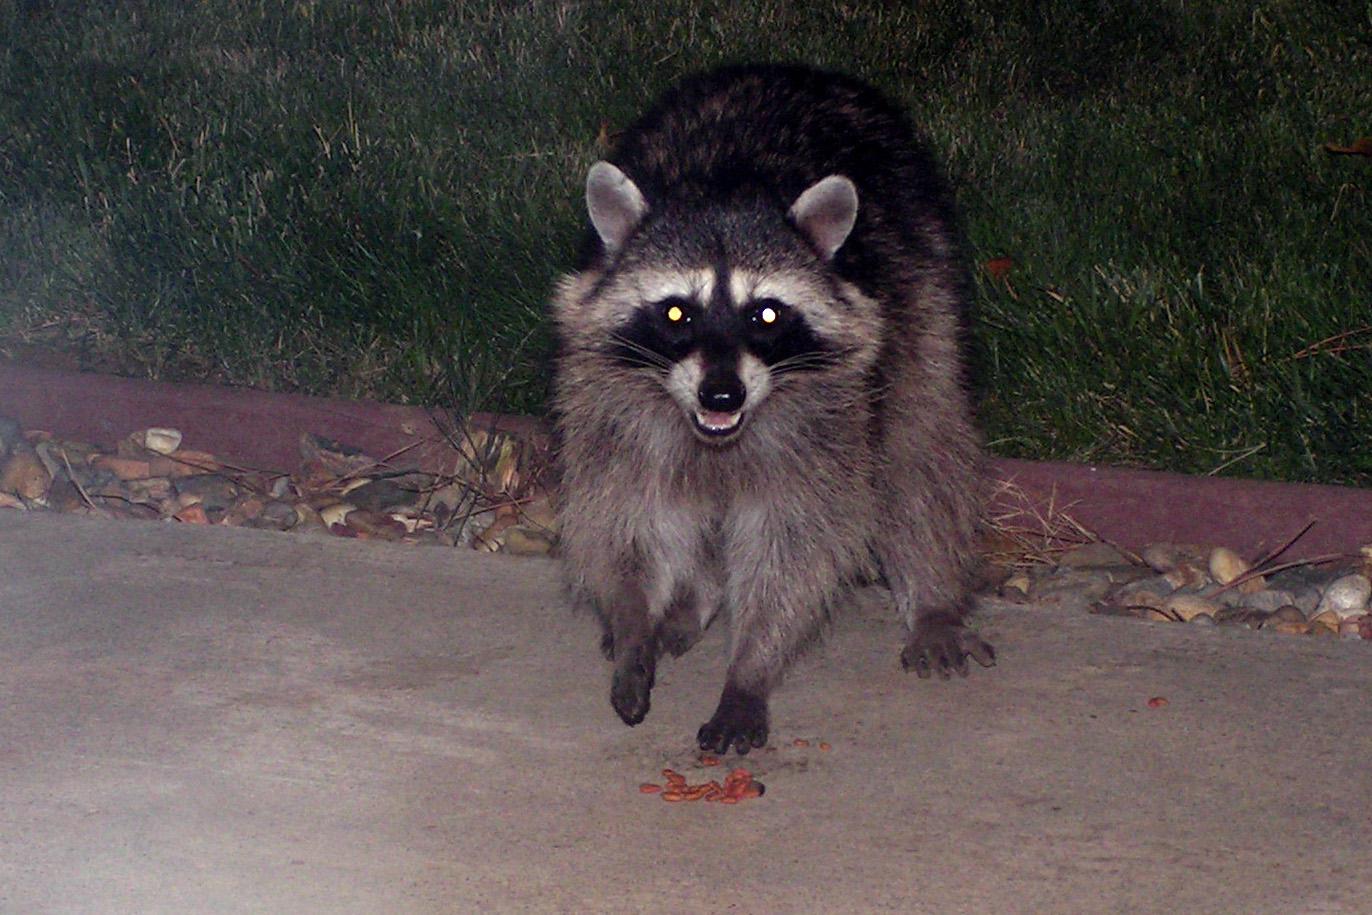 photo of racoon. A common predator found in every backyard.